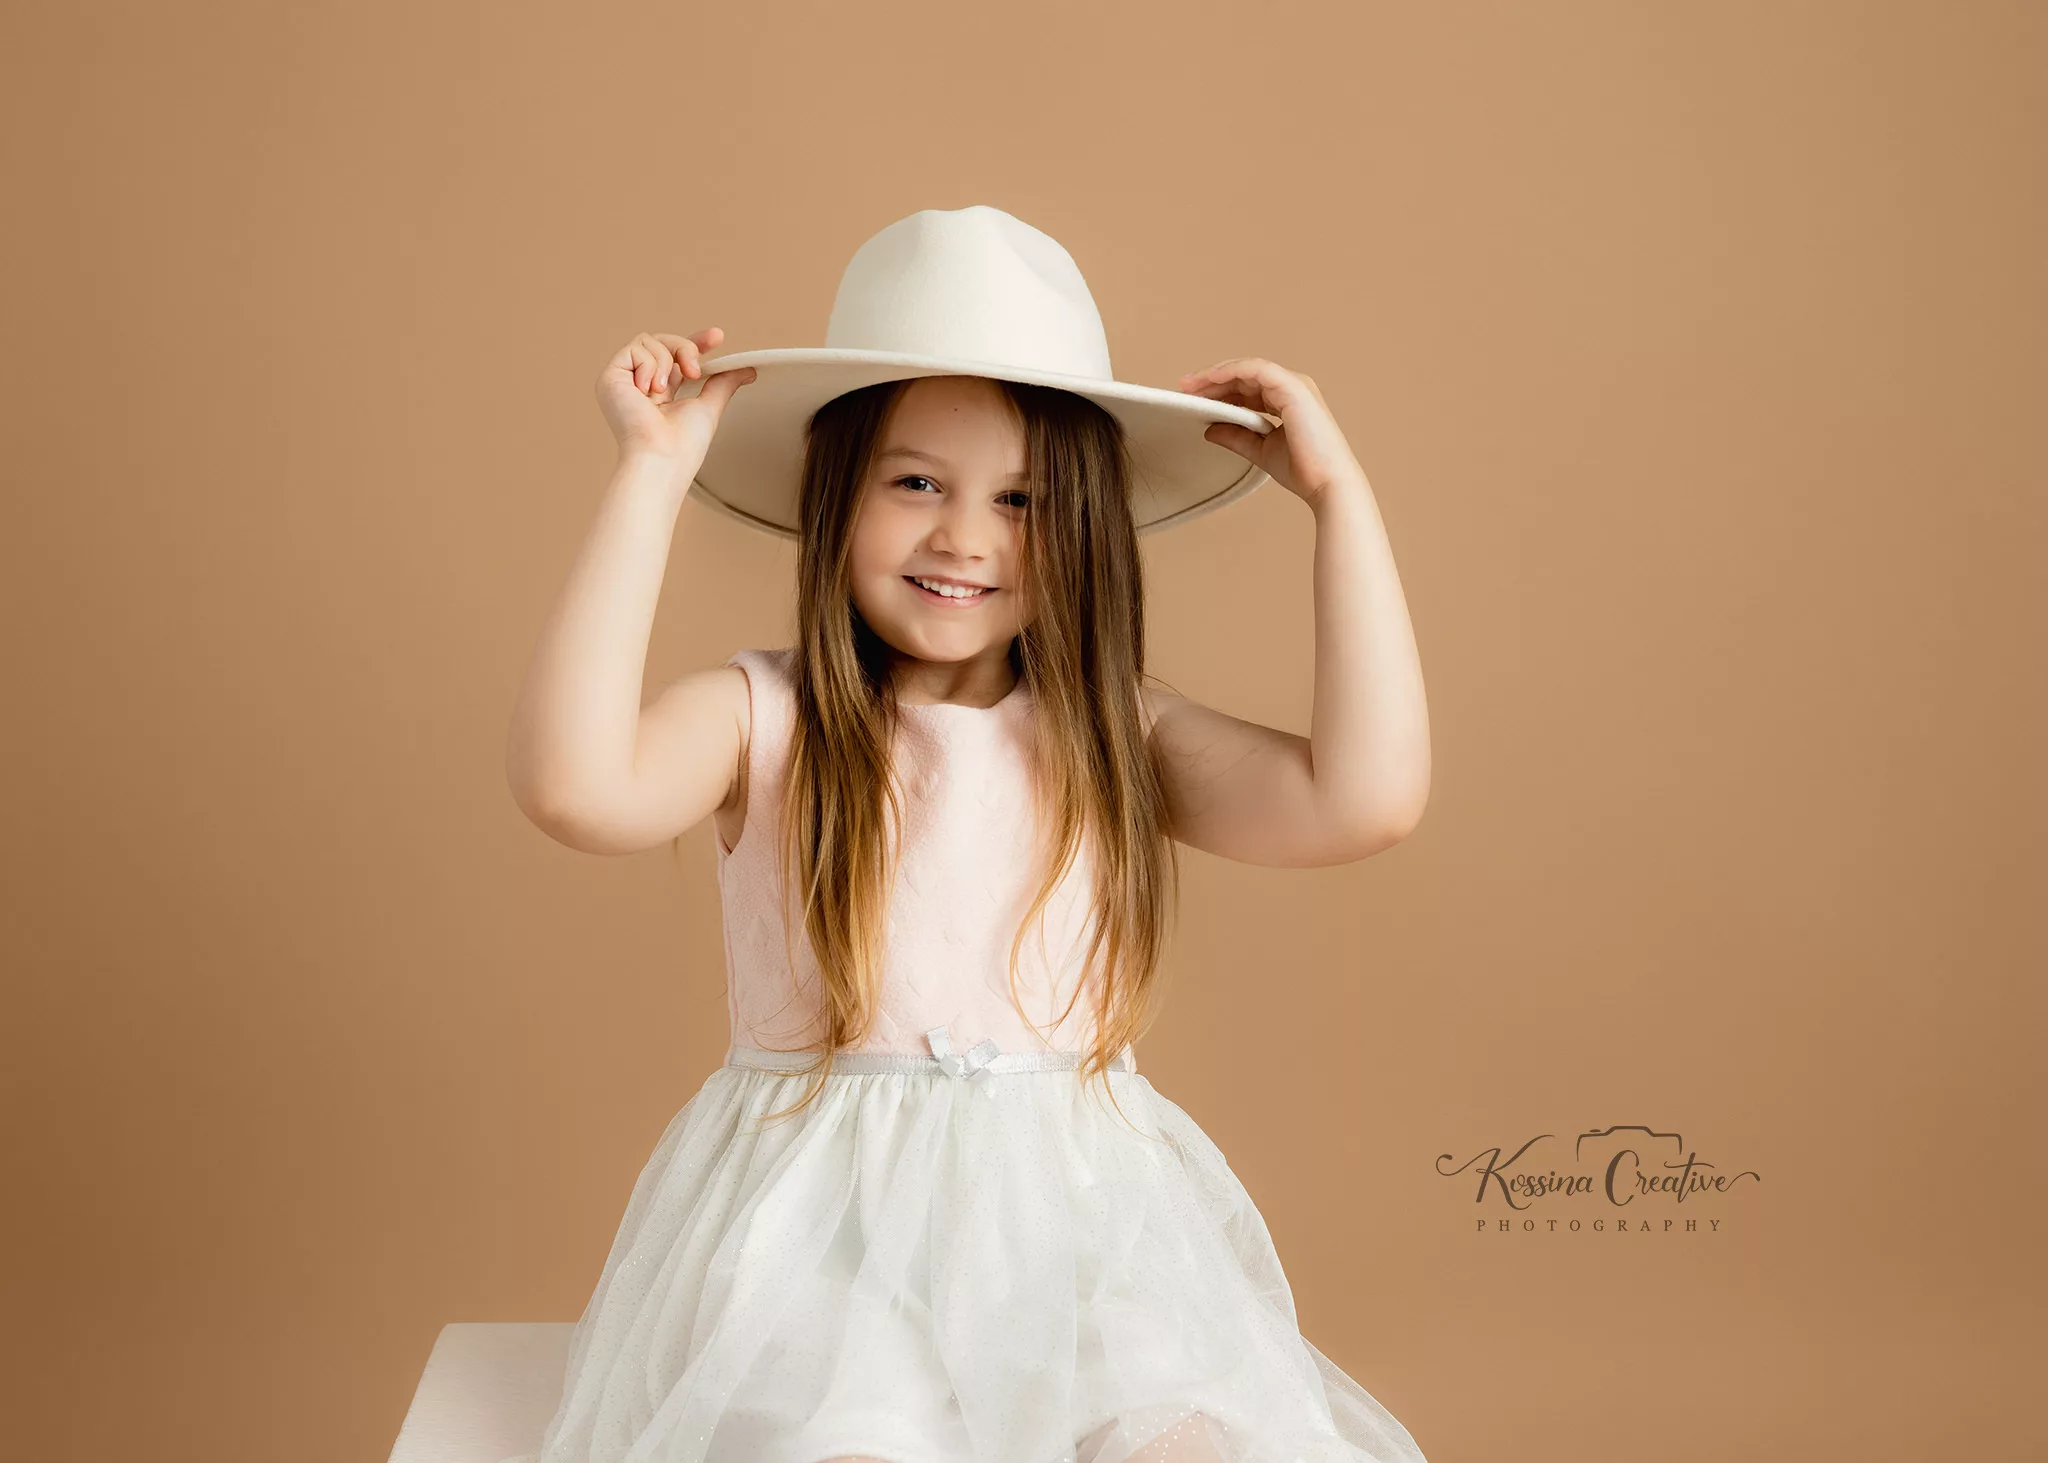 Orlando Family Photographer Birthday Photoshoot little girl with dress and hat